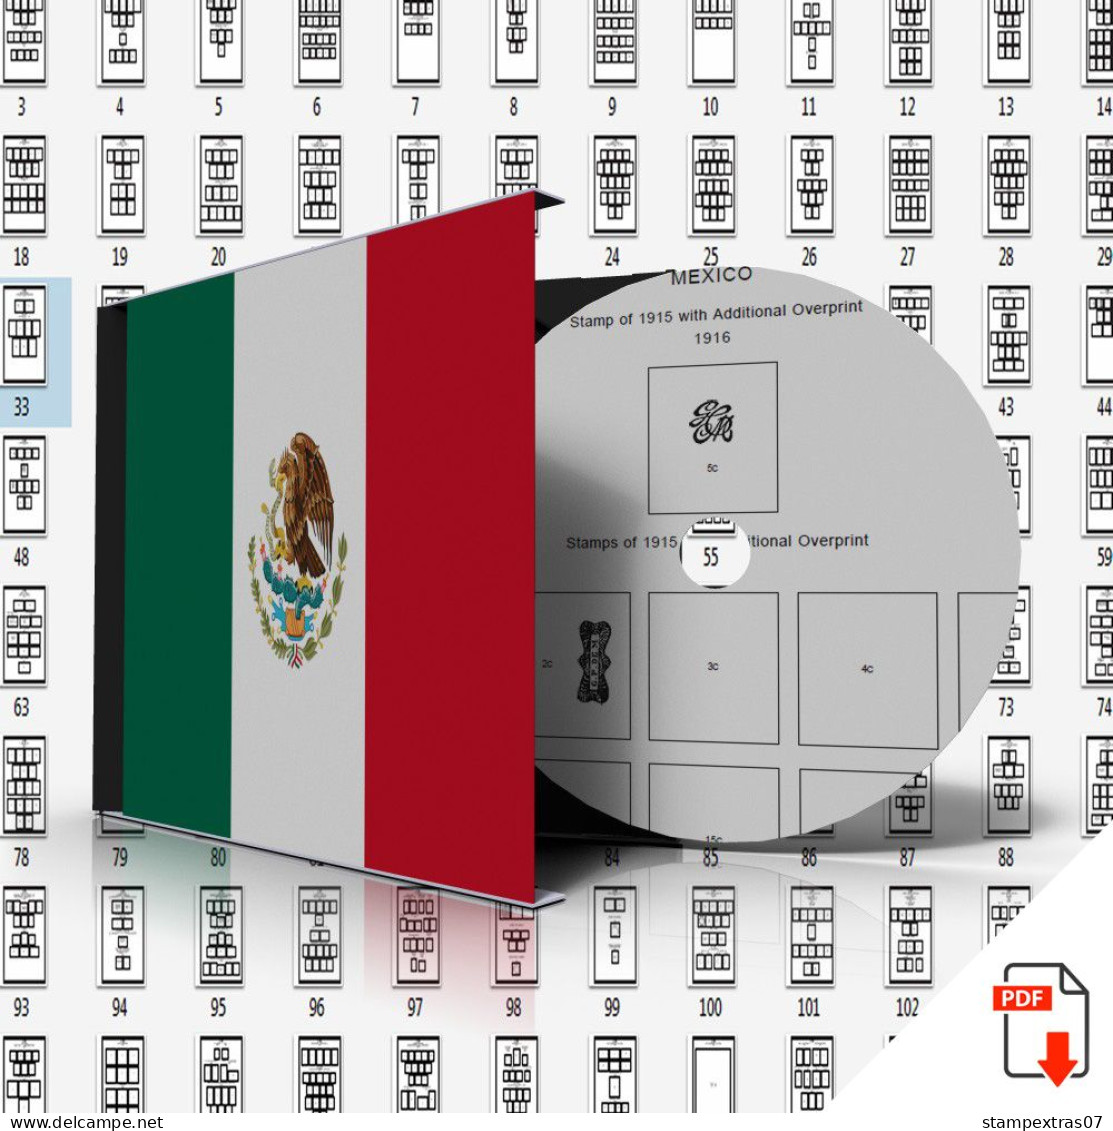 MEXICO STAMP ALBUM PAGES 1856-2011 (432 Pages) - English